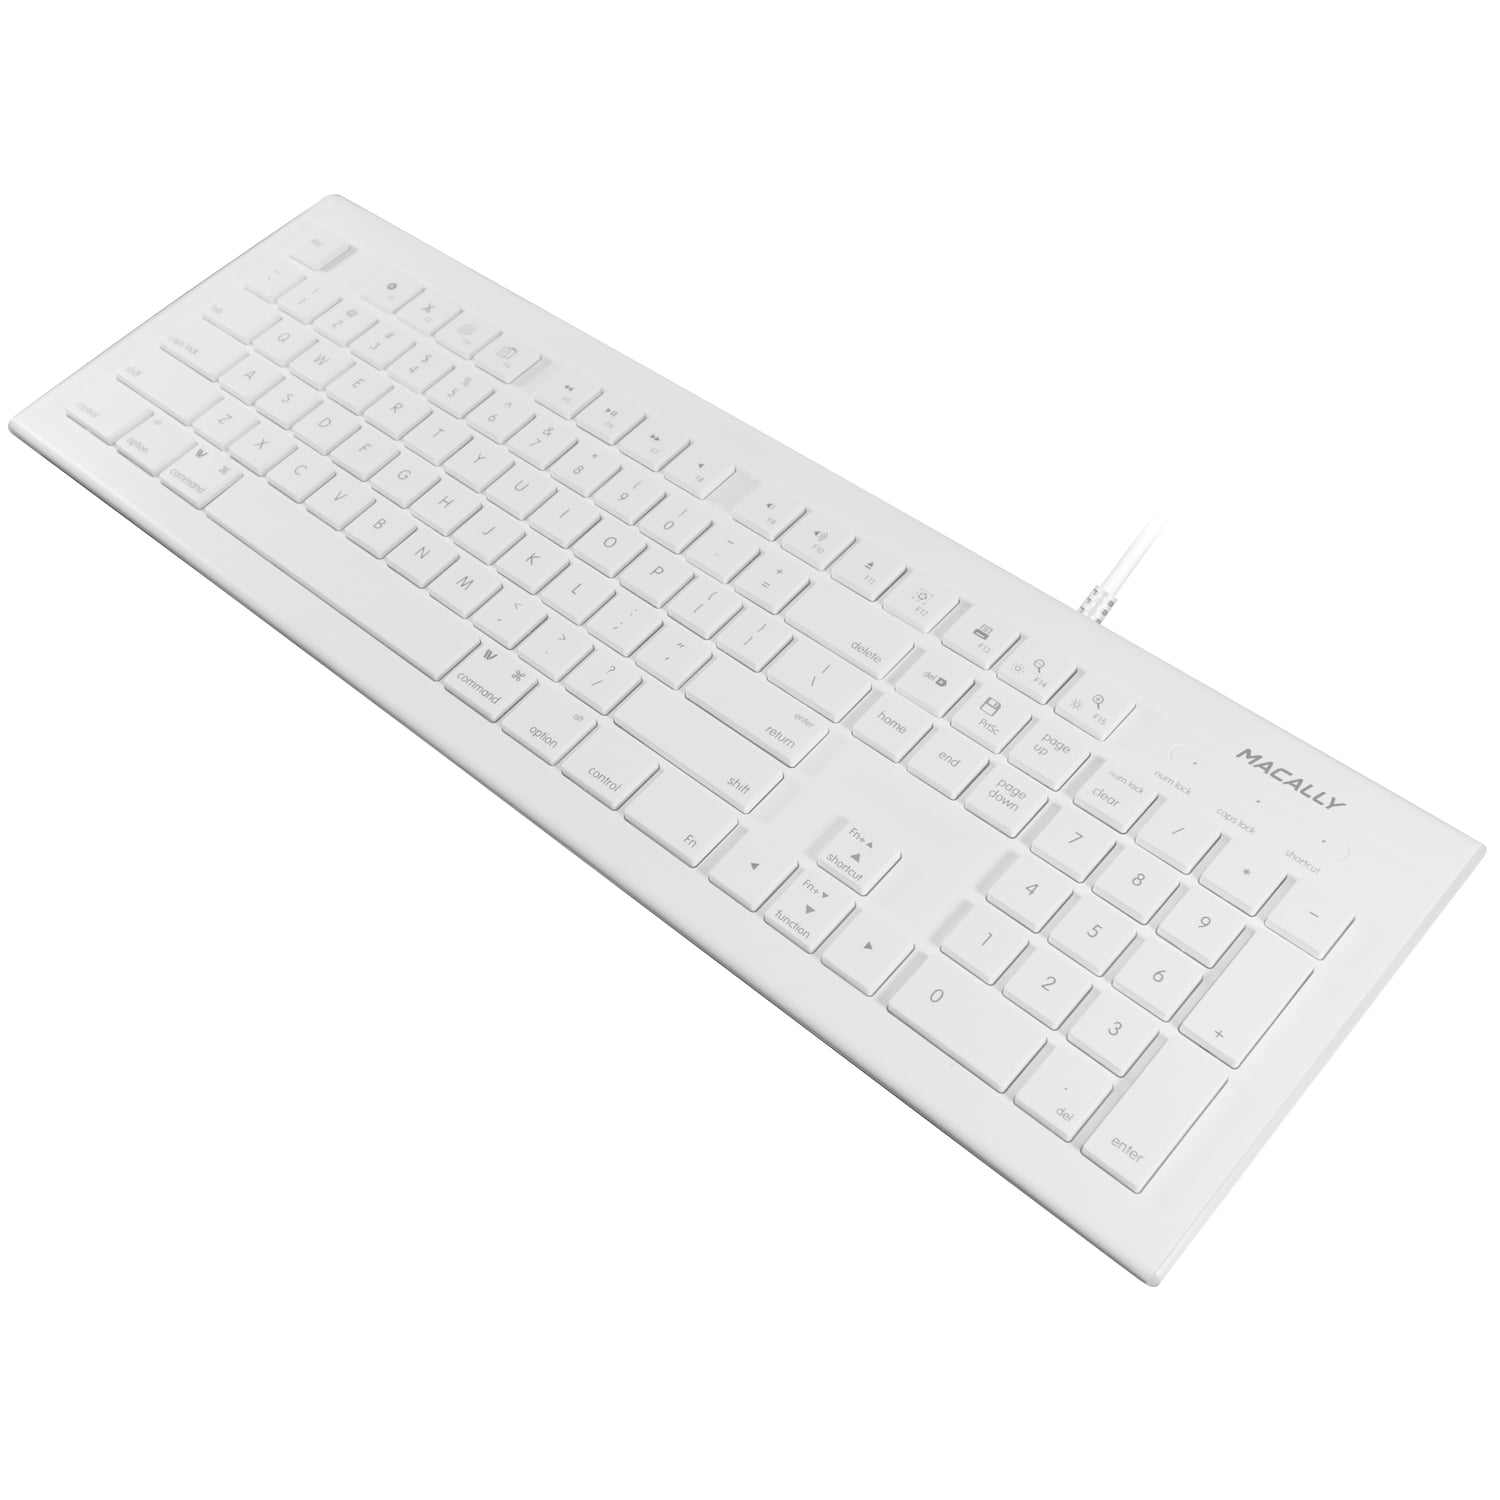 Full USB Keyboard for Mac and PC - Plug & Play Wired Computer Keyboard - Compatible Apple Keyboard with 15 Shortcut Keys for Easy Controls & Navigation - White (MKEYE) - Walmart.com